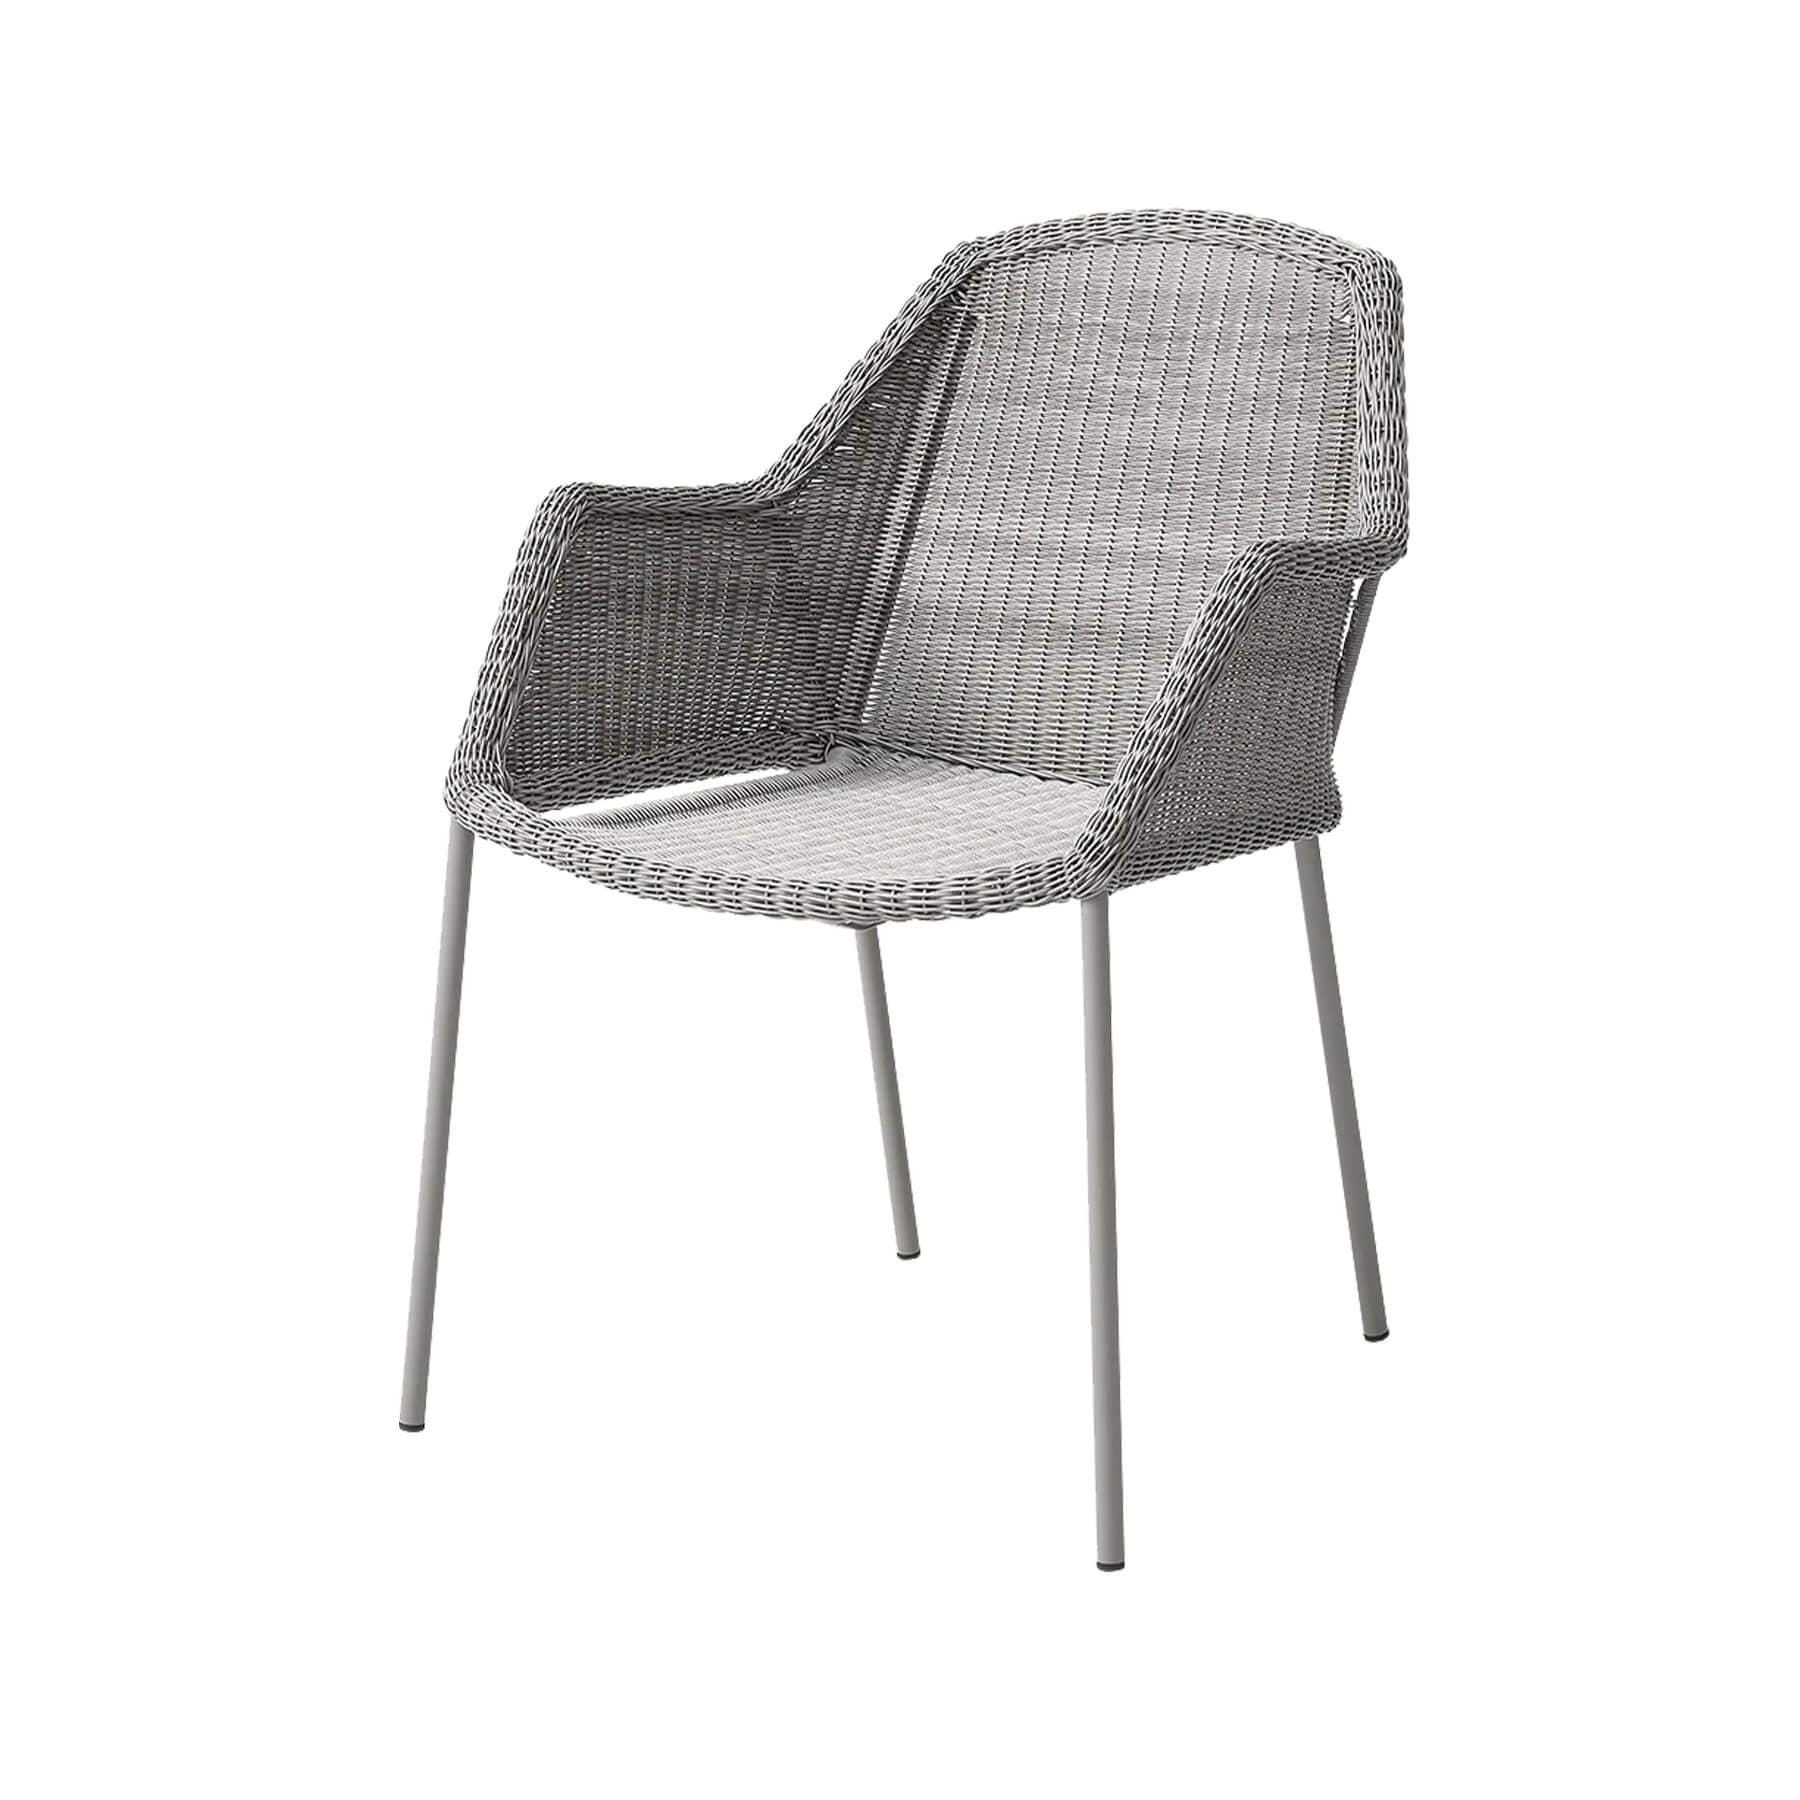 Caneline Breeze Outdoor Chair Taupe Seat No Cushion Grey